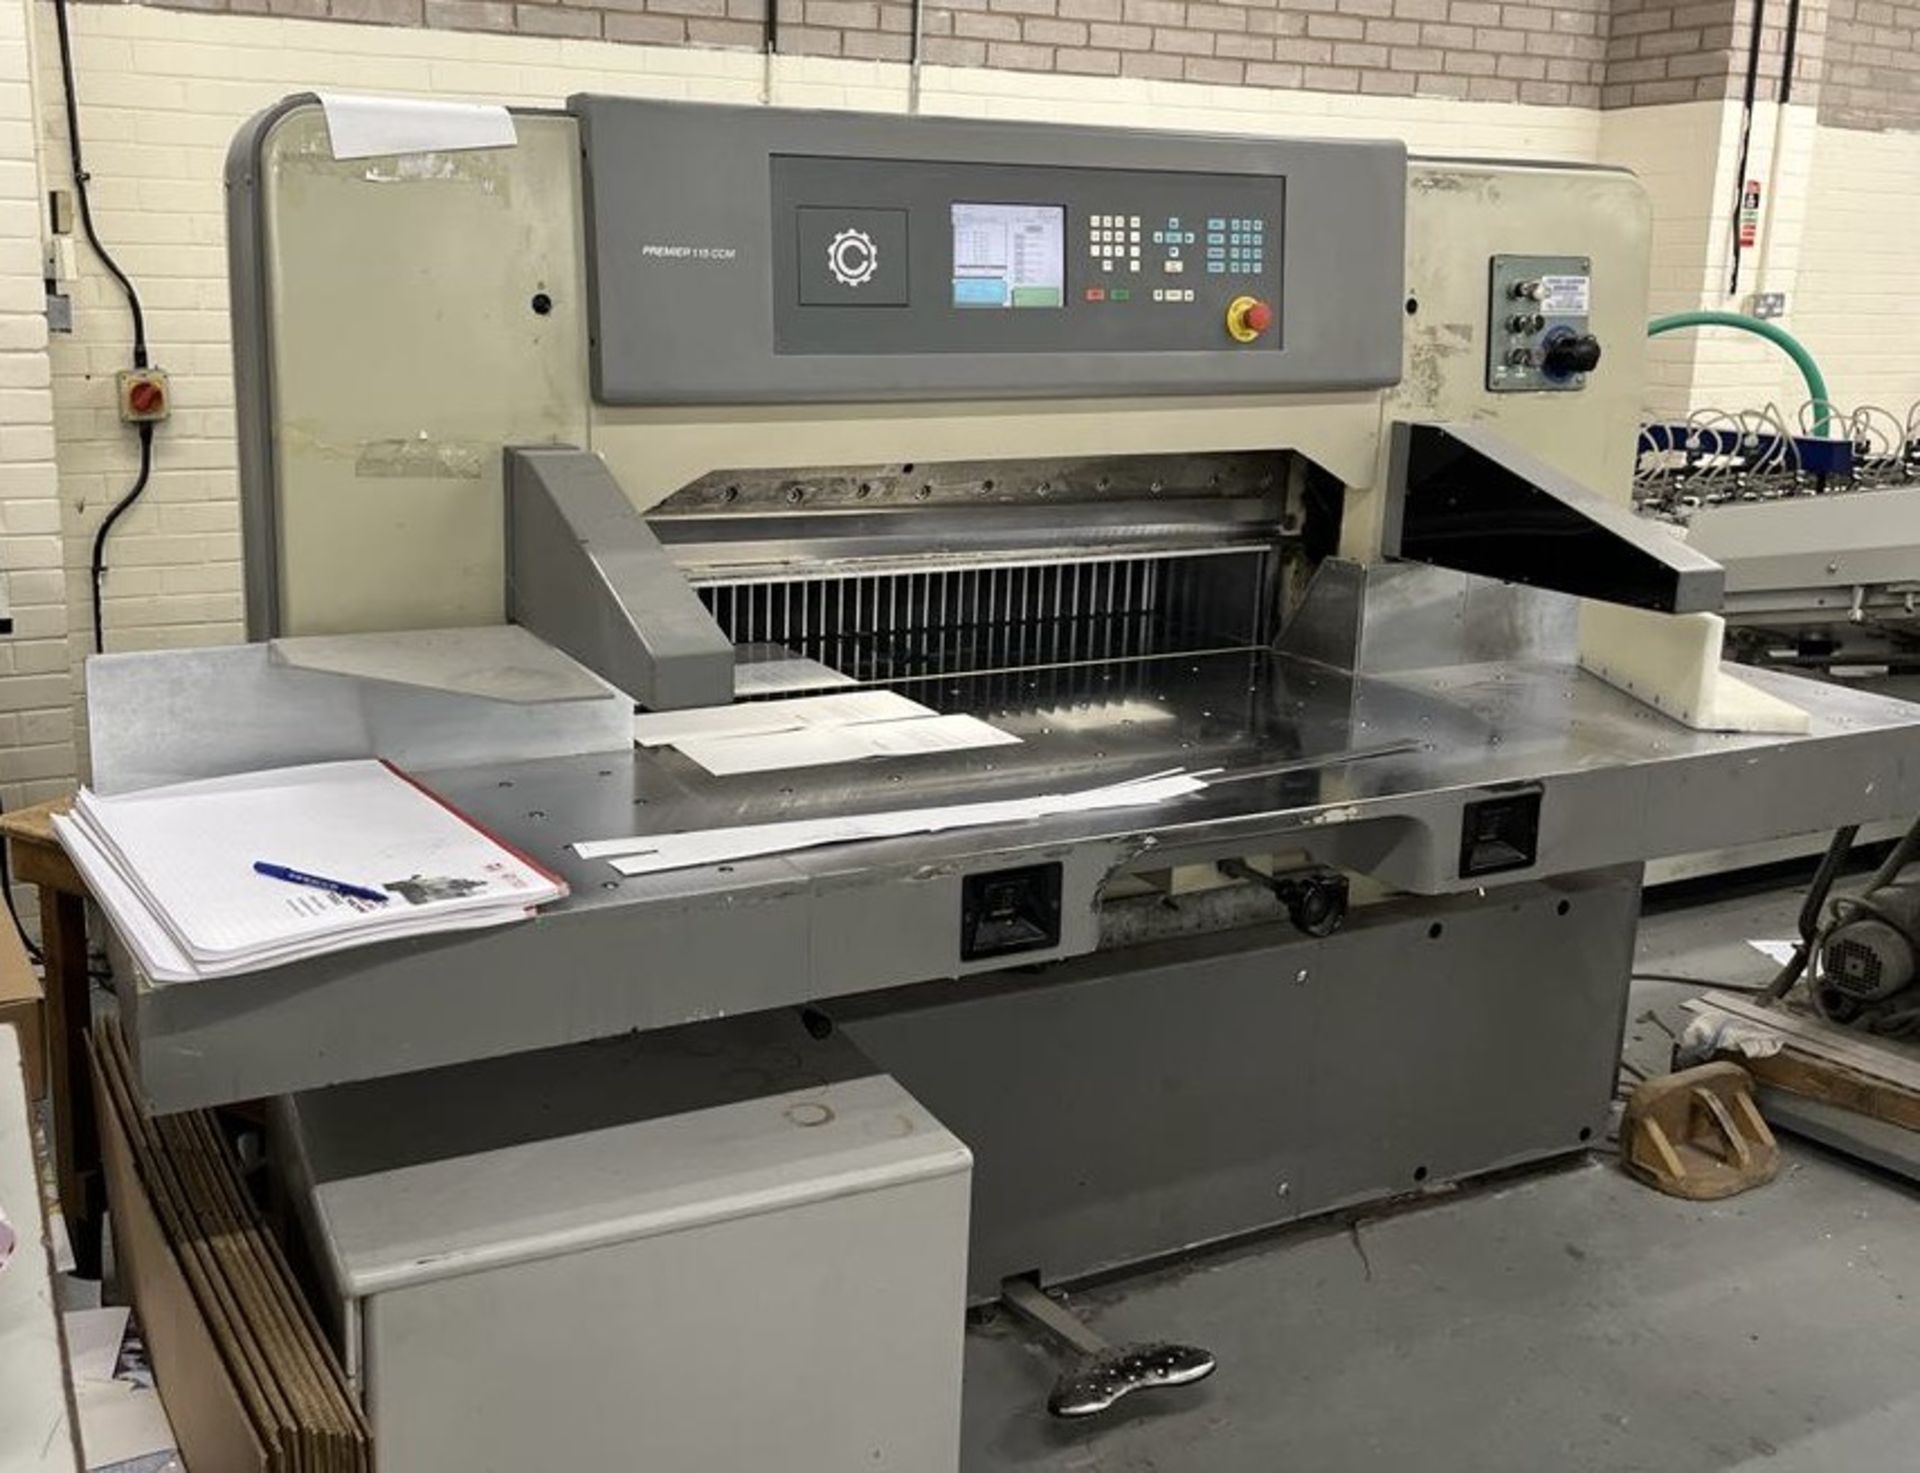 Terry Cooper Premier 115 CCM Programmable Guillotine, 1150mm, year 2006, serial number 06110 ( - Image 2 of 6